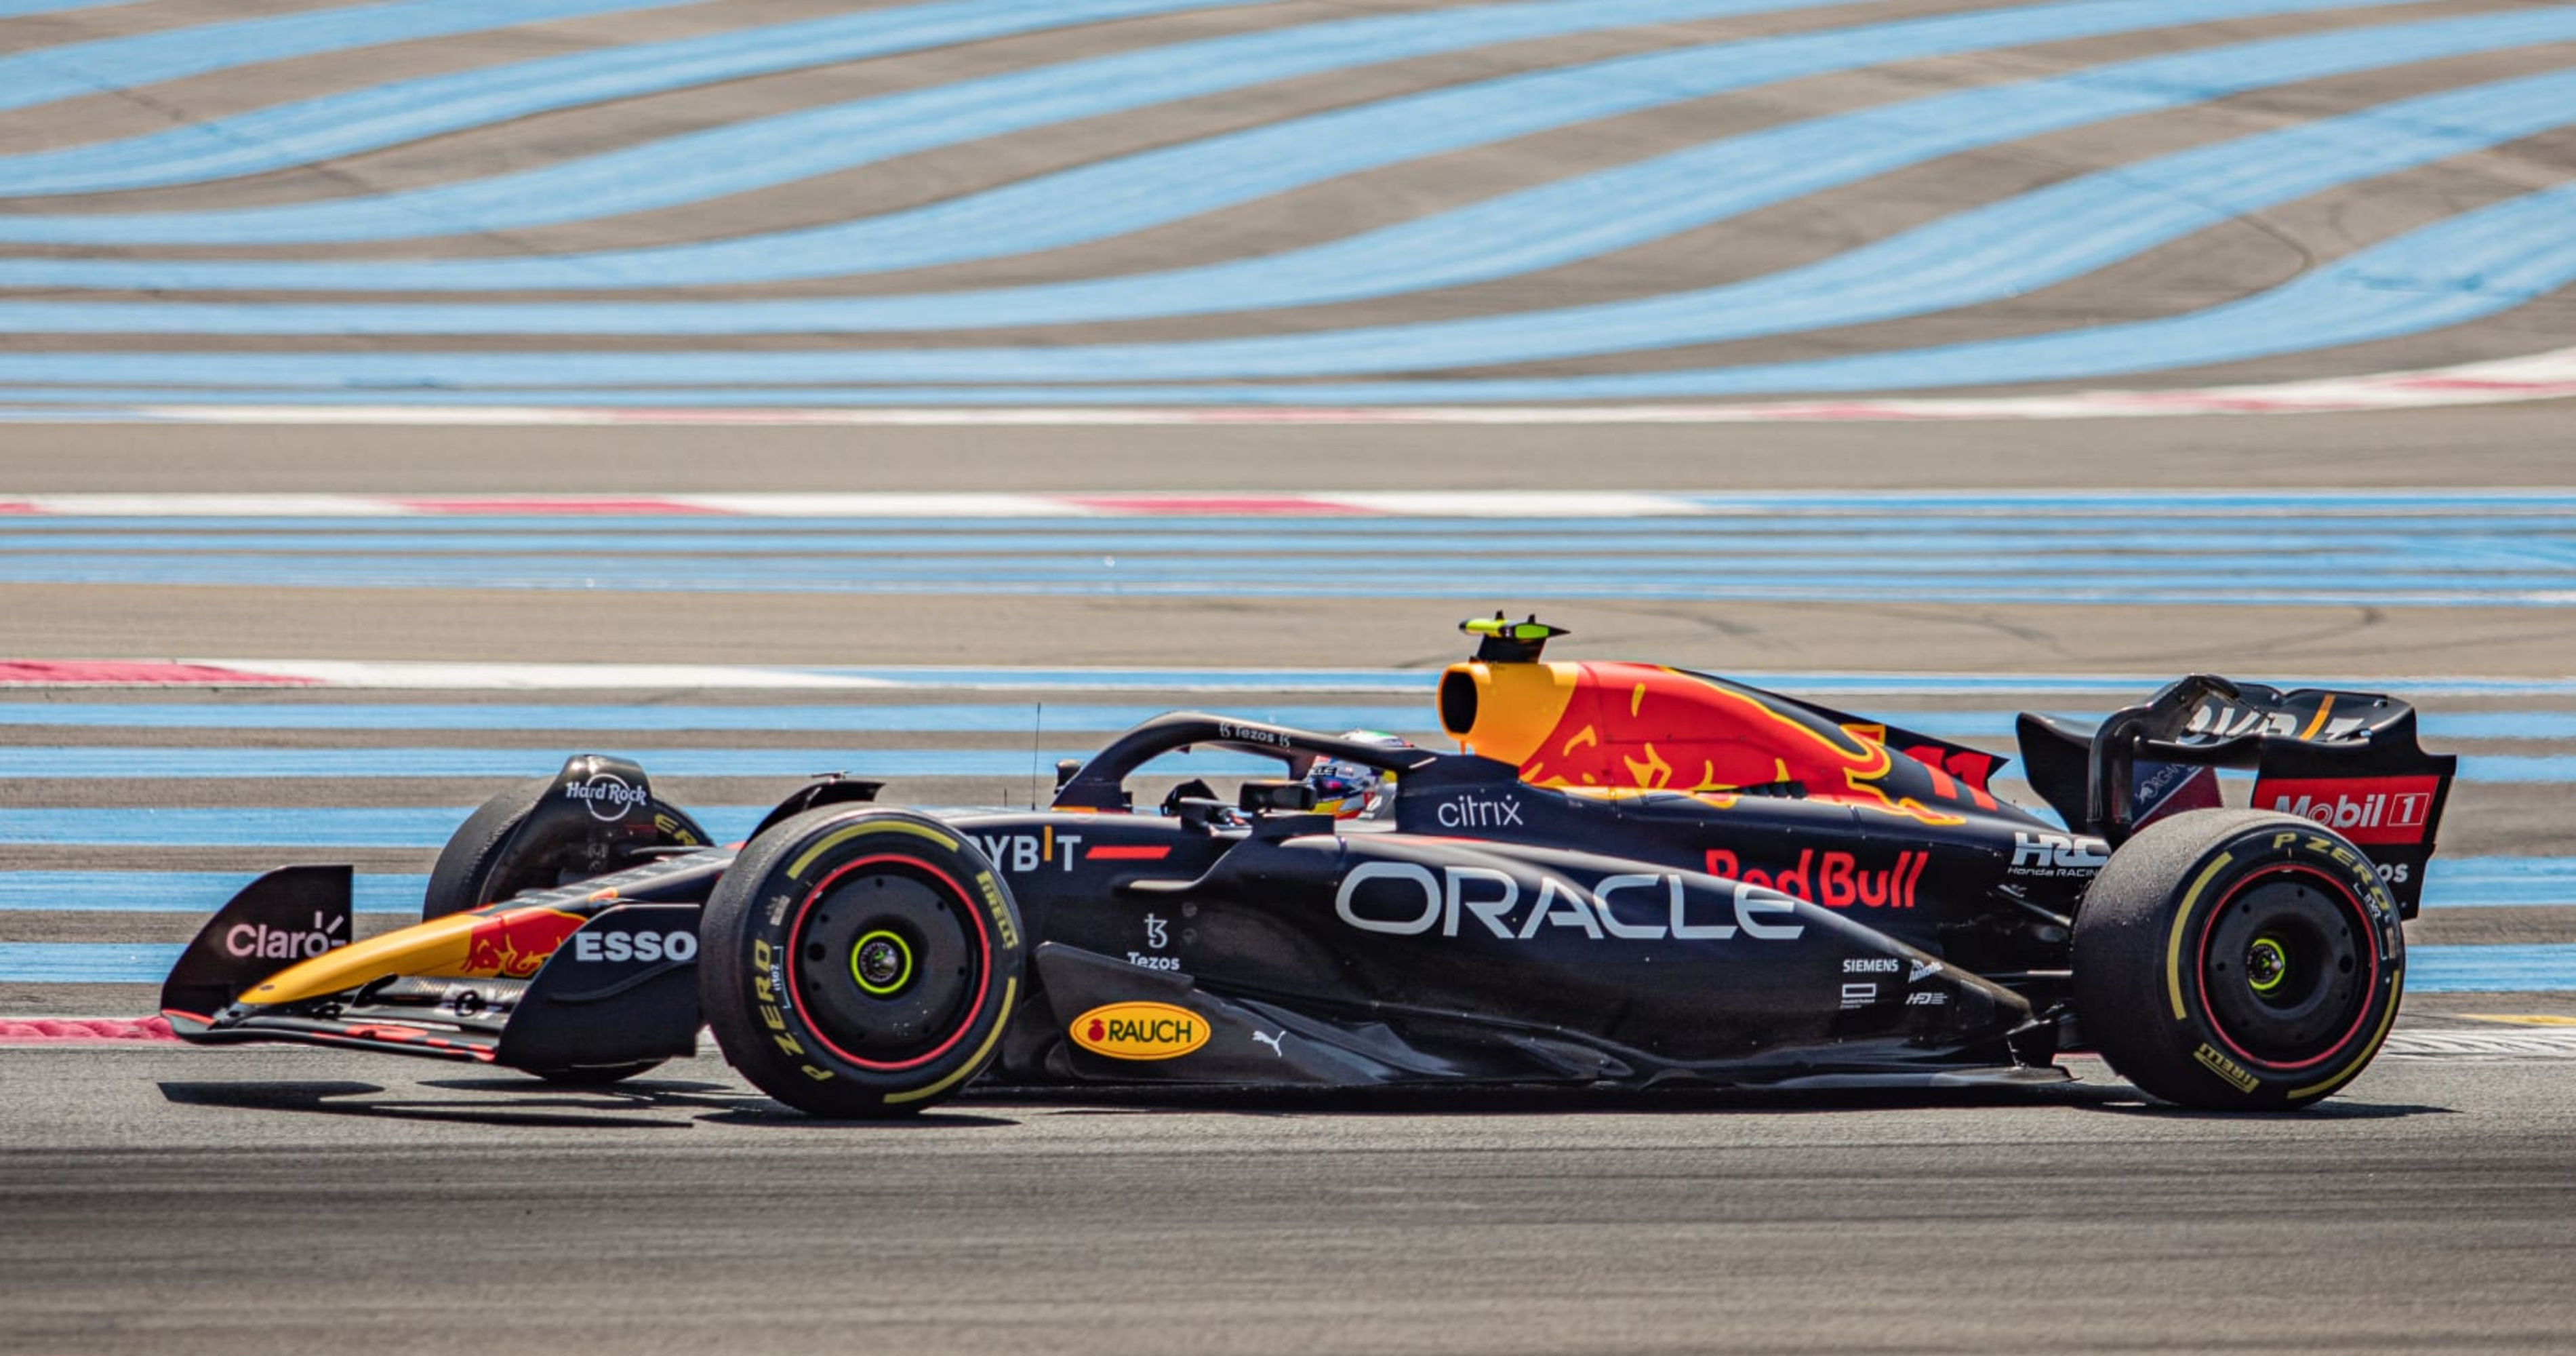 Porsche S Plans To Buy 50 Of Red Bull F1 Racing Team Detailed In Public Document News Scores Highlights Stats And Rumors Bleacher Report